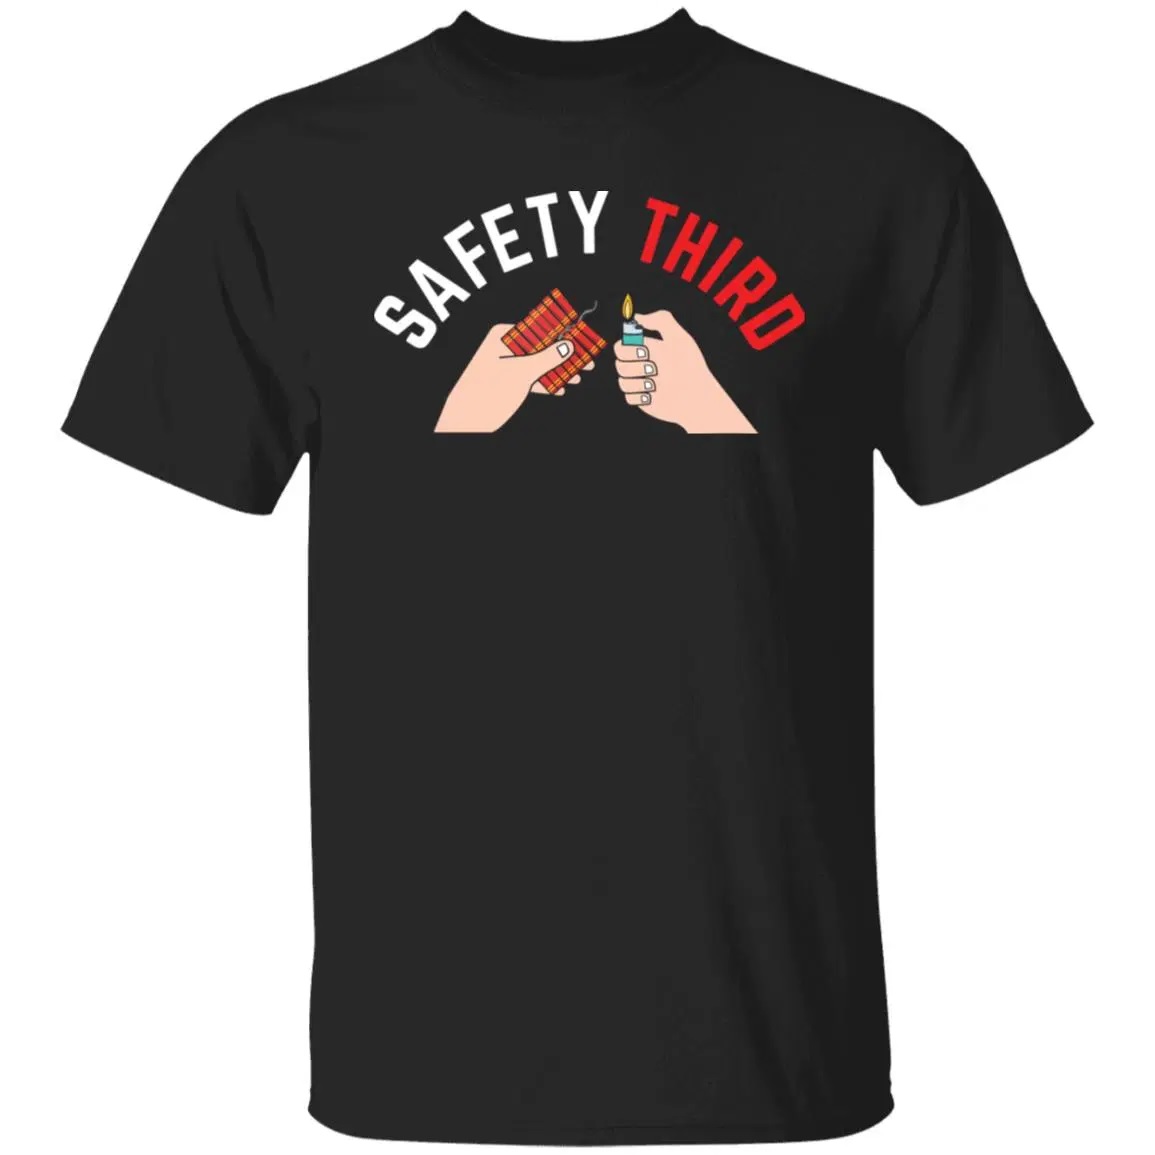 4th Of July Patriotic Fireworks Safety Third Shirt